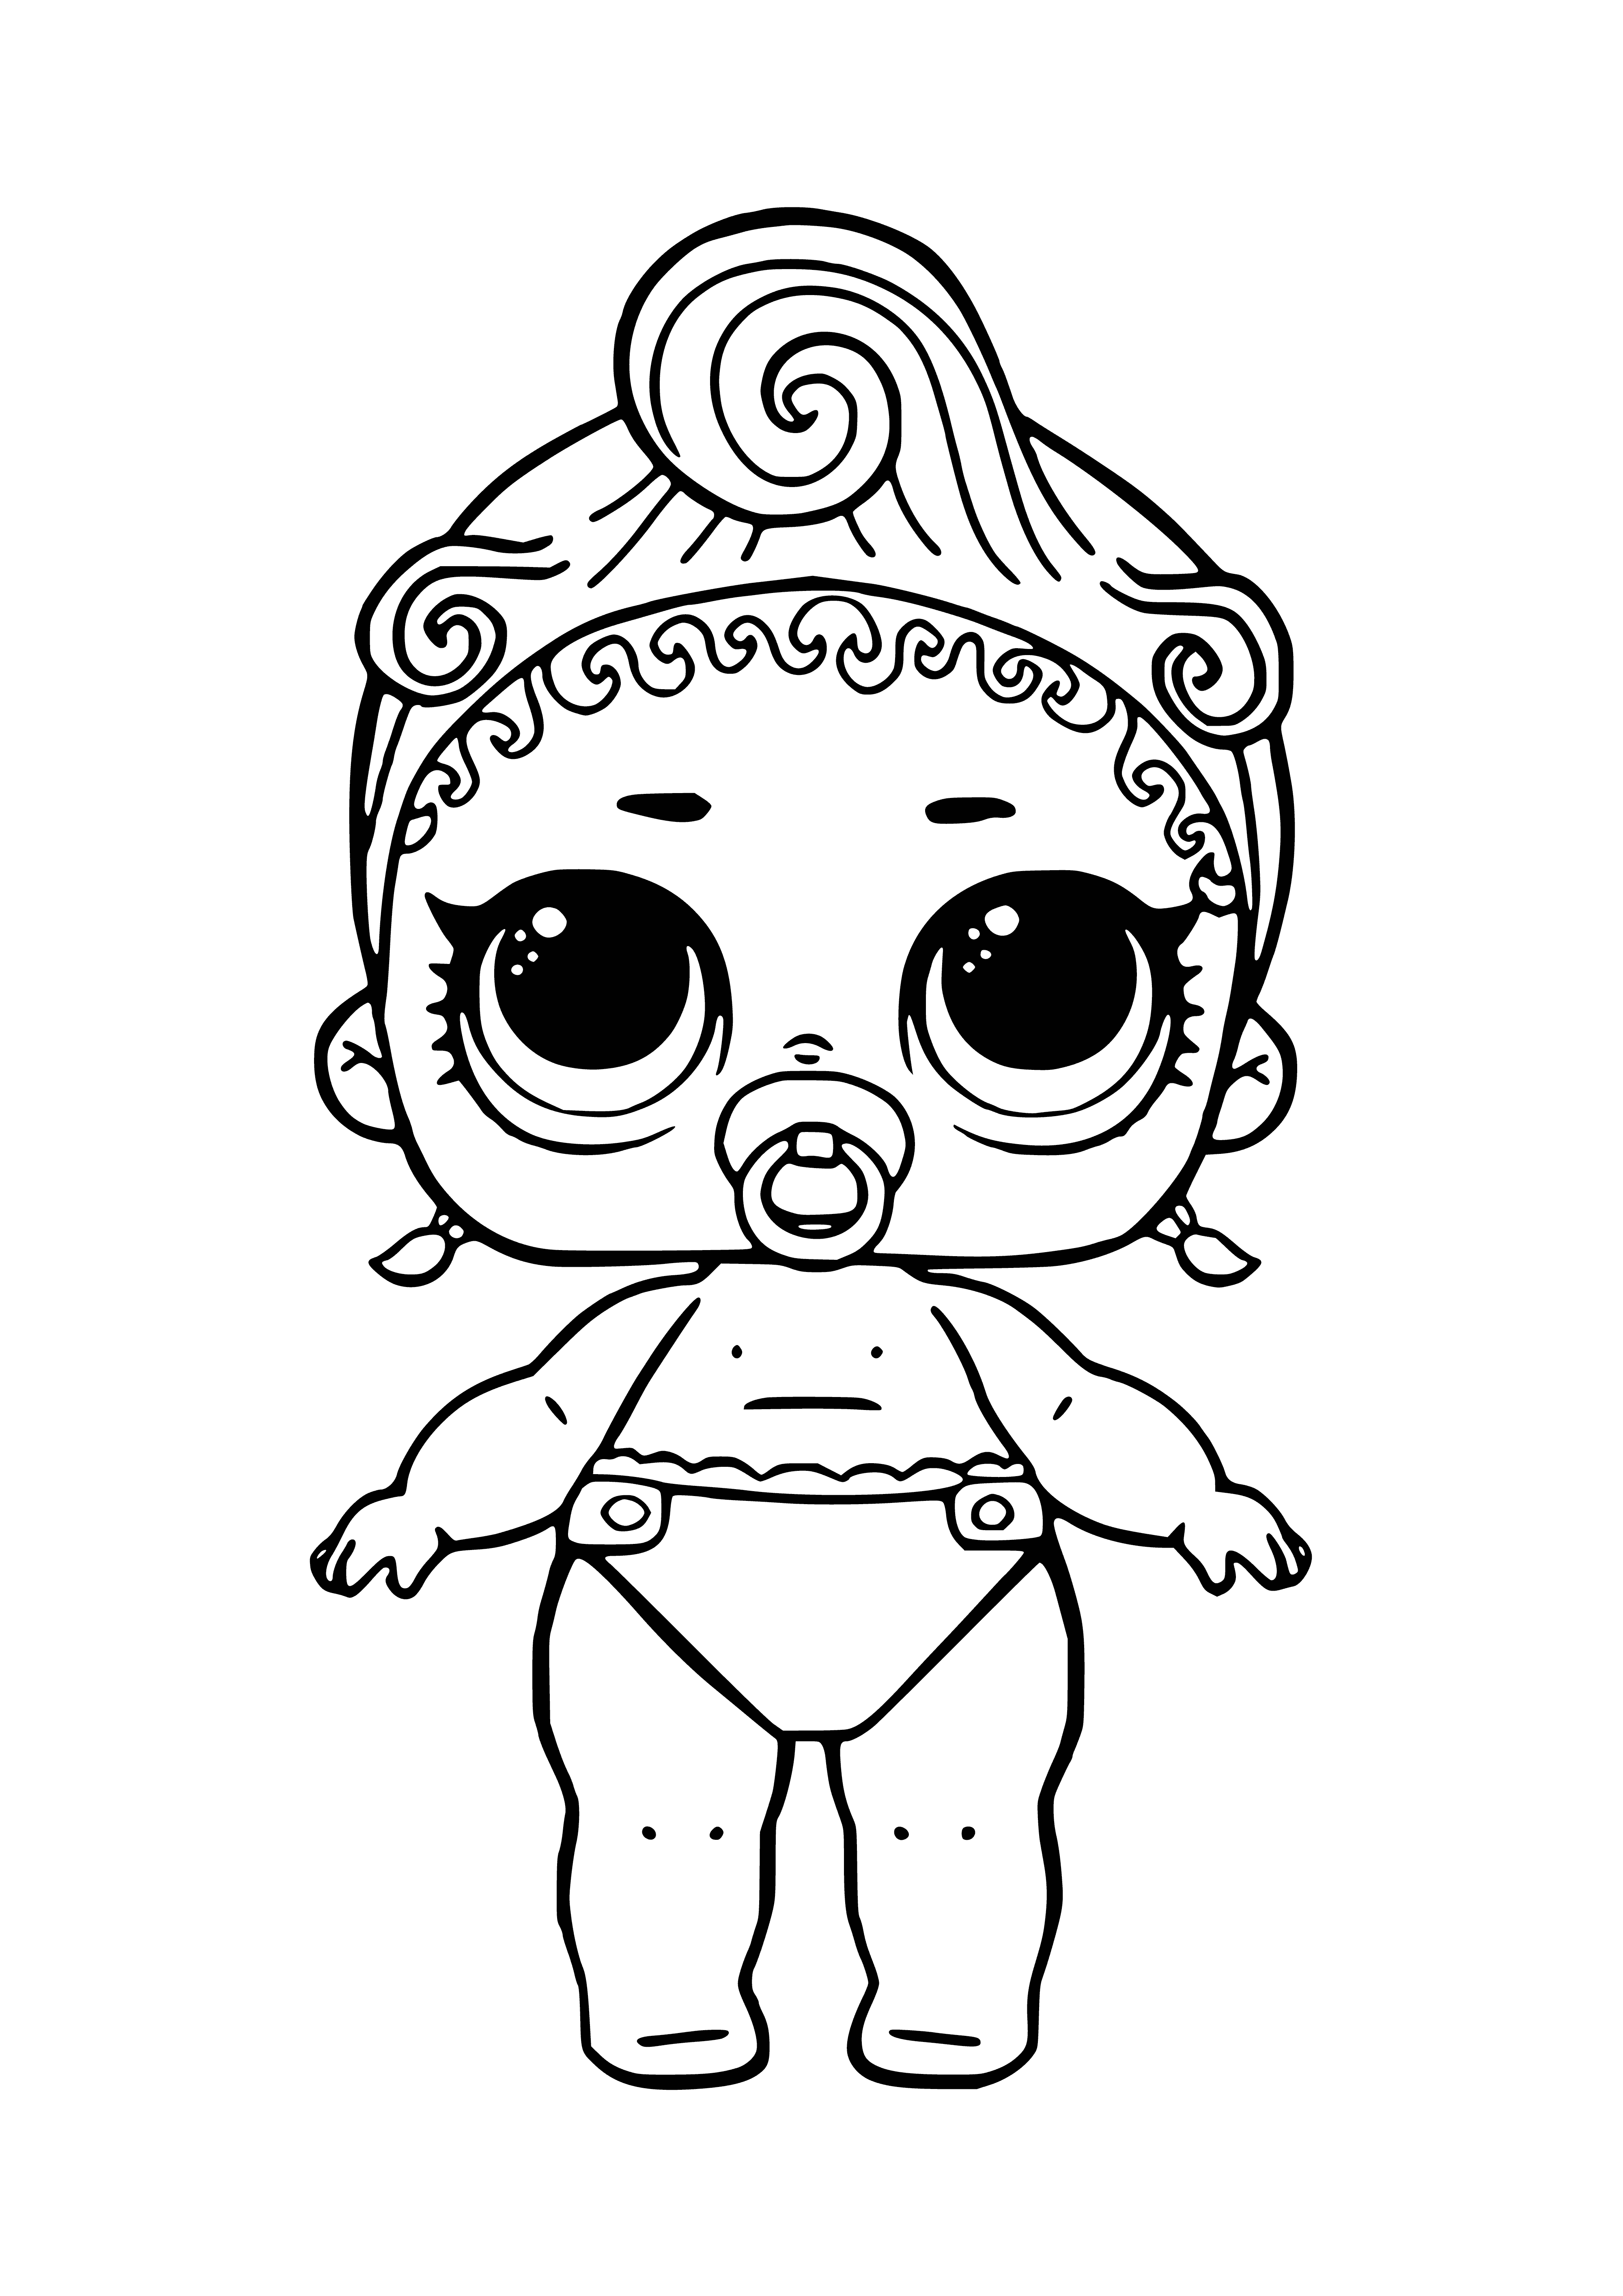 LOL baby Pink baby coloring page